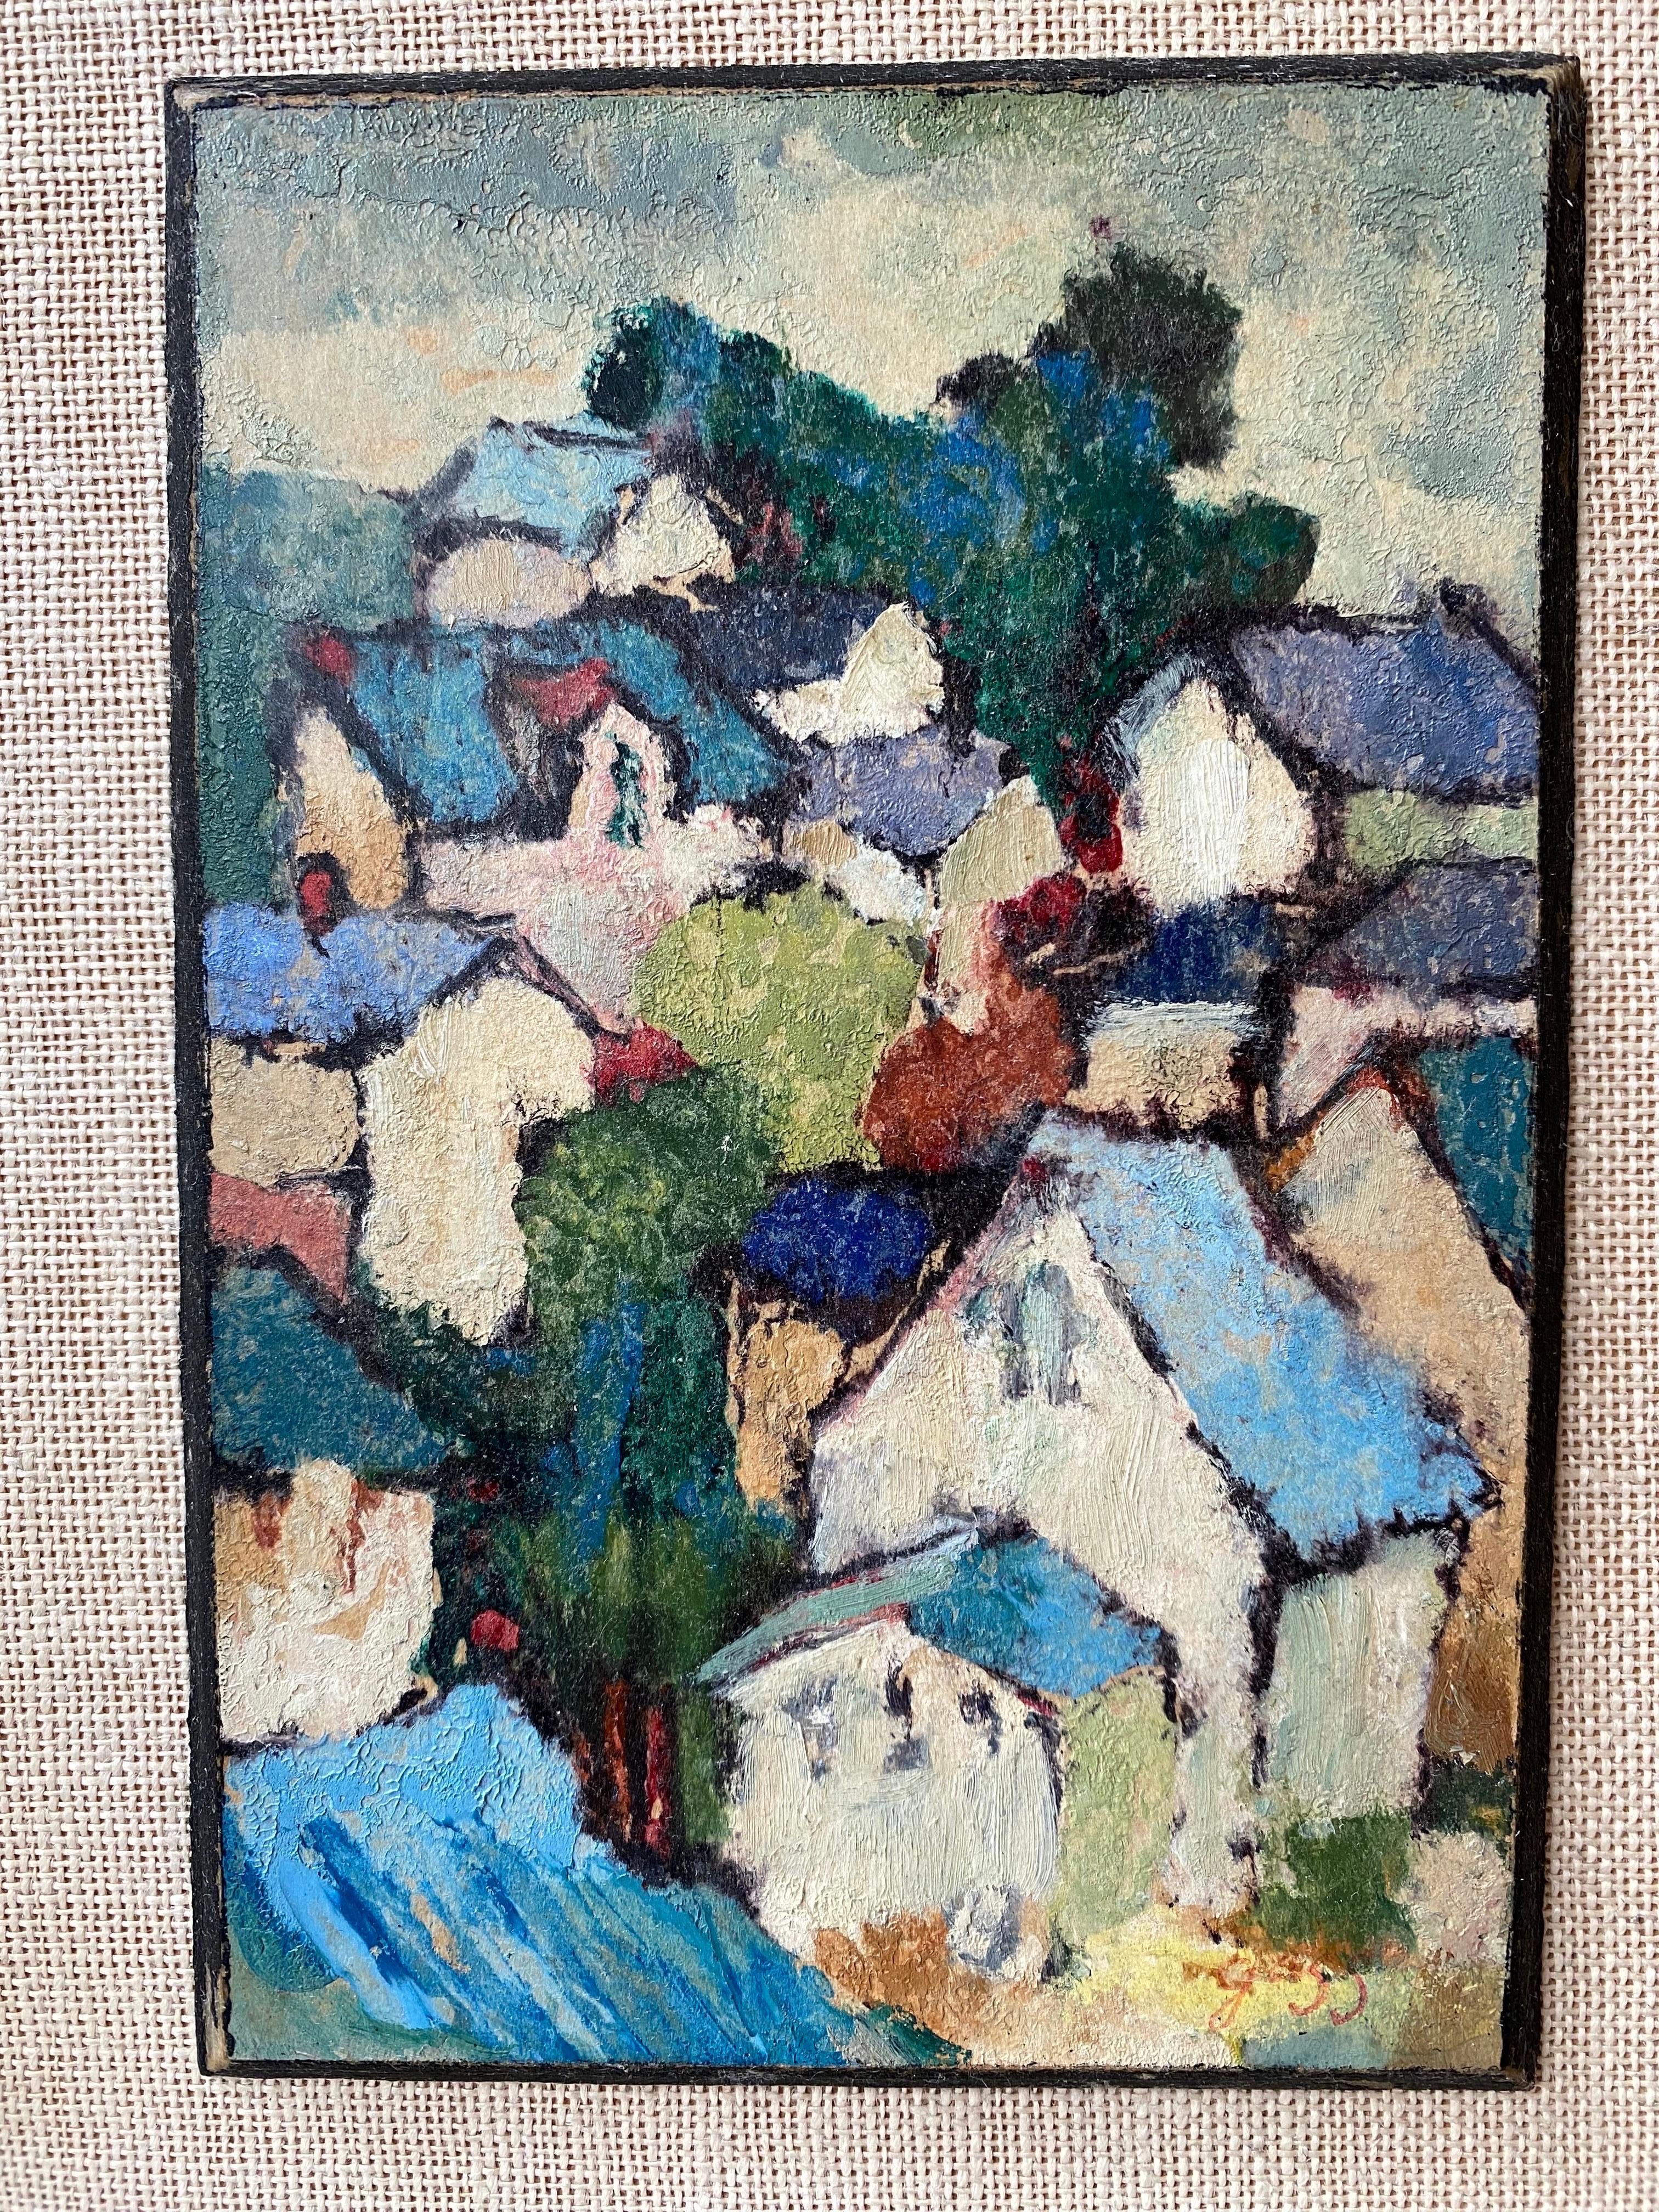 Small Painting on a mounted board. Cityscape signed Gagg. Looks like all original. Did find a couple other paintings by the artist, but no information available. Nice little painting, that could easily fit into many types of spaces!